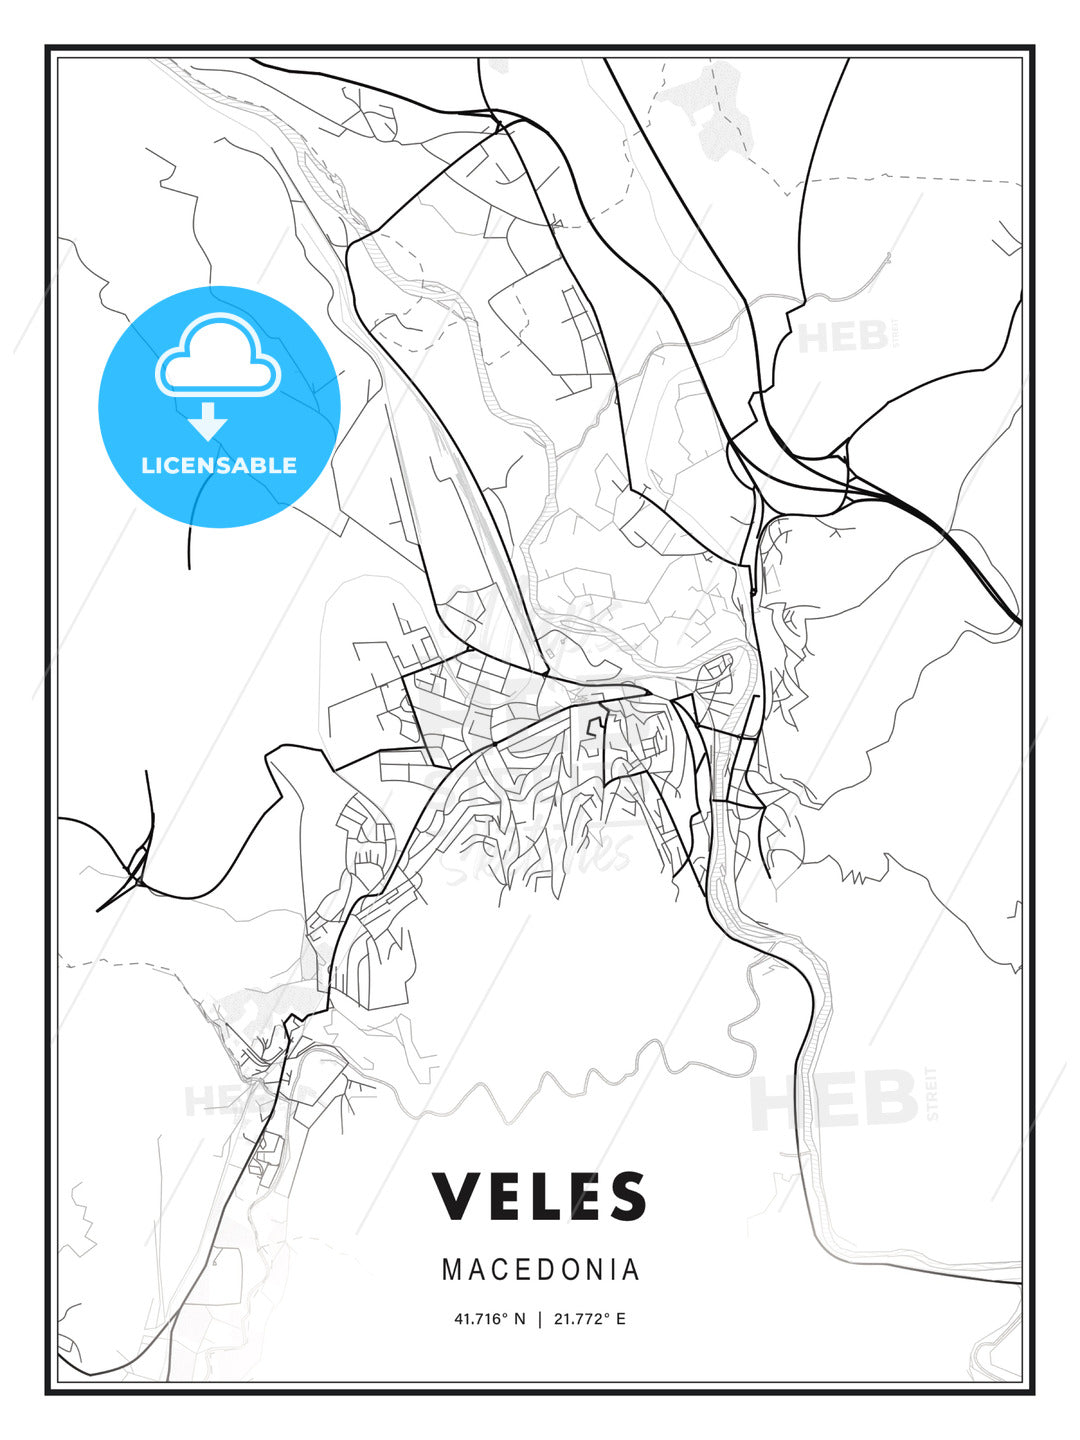 Veles, Macedonia, Modern Print Template in Various Formats - HEBSTREITS Sketches